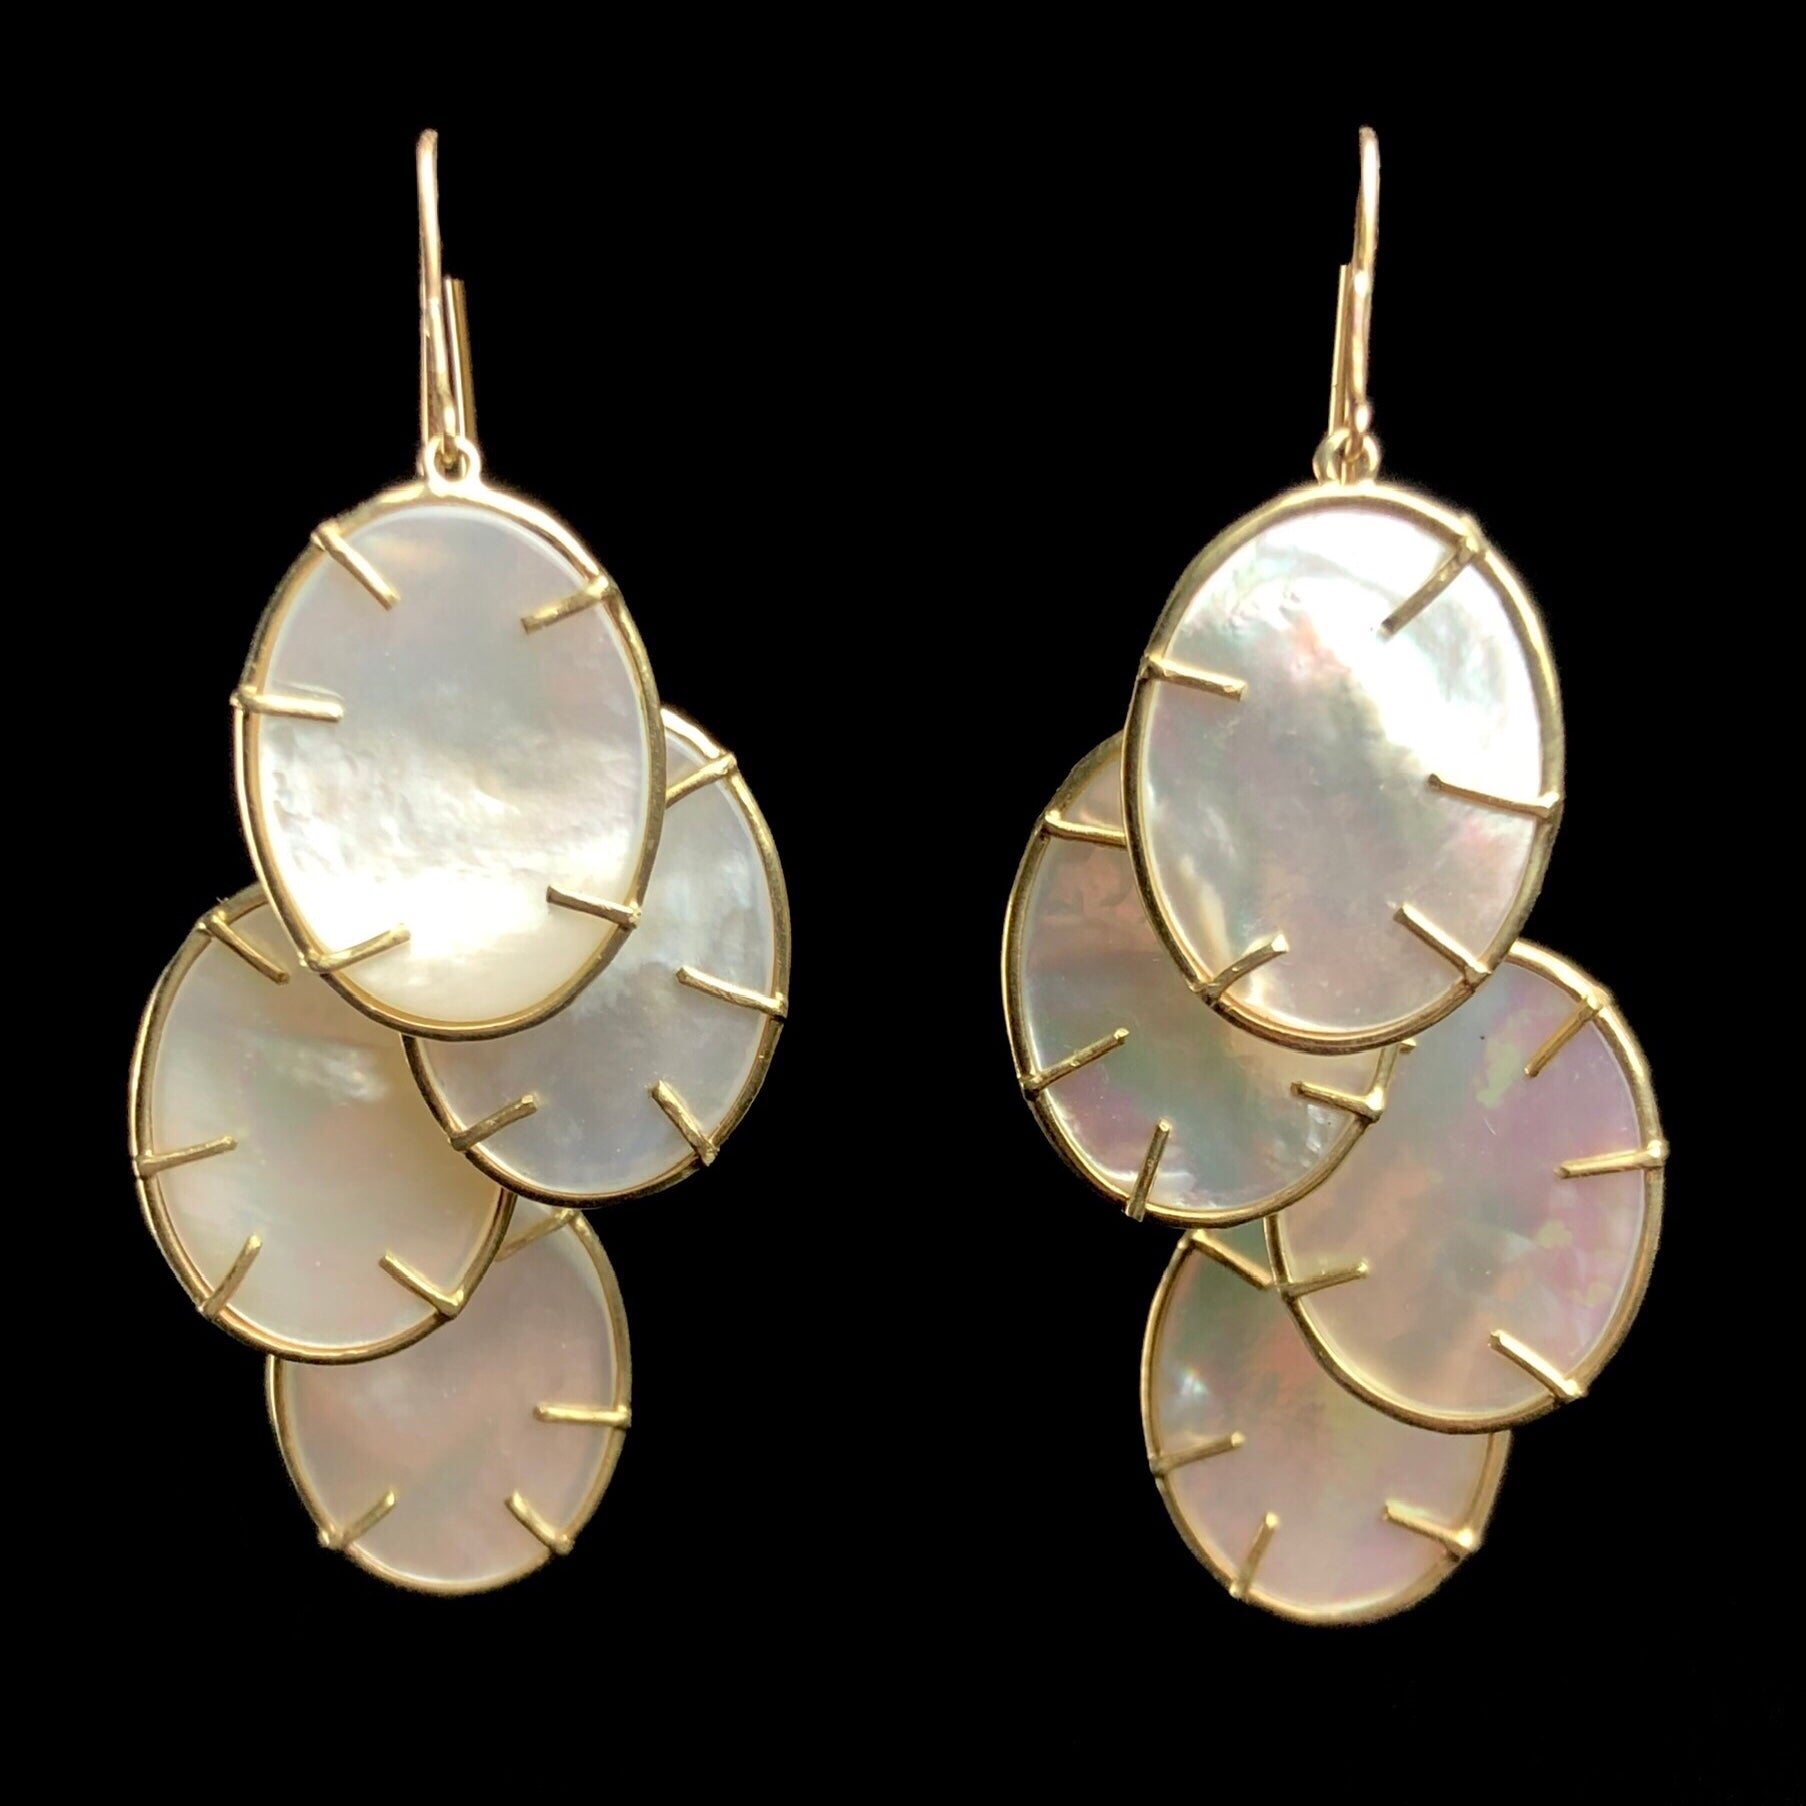 Silver Dollar Earrings hanging side by side each with four white, oval medallions held by gold prongs 